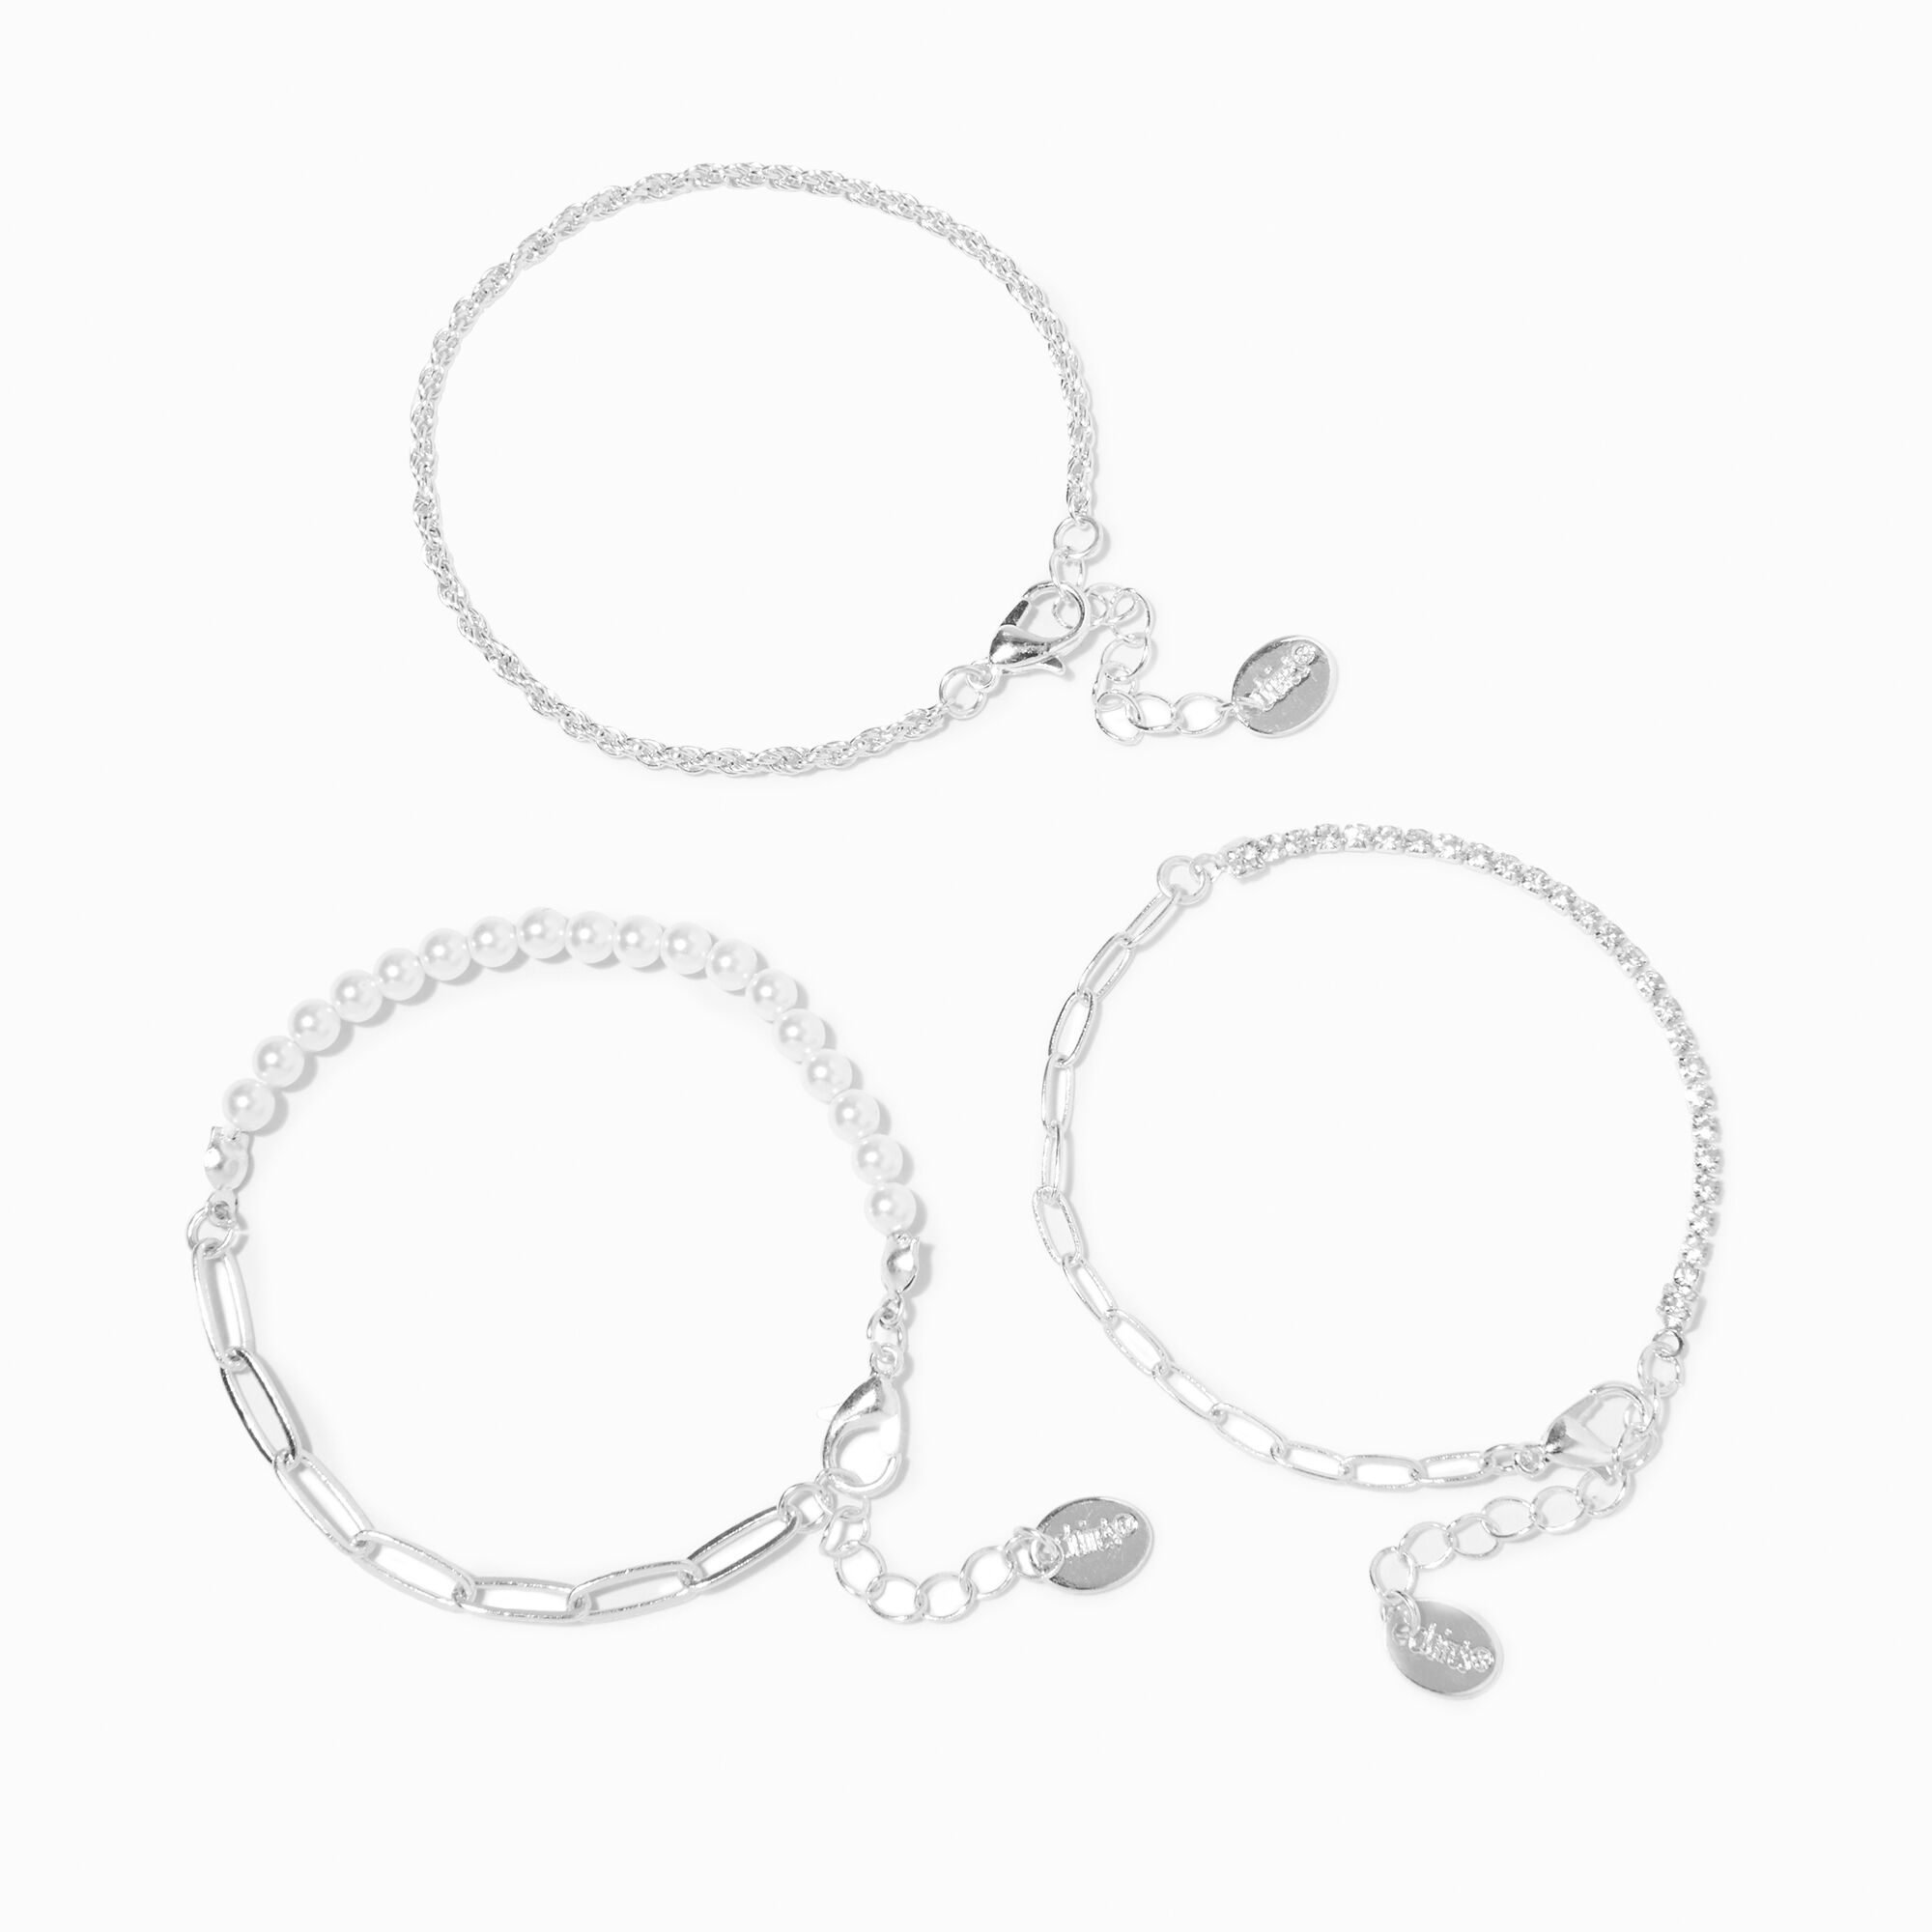 View Claires Tone Pearl Woven Chain Bracelets 3 Pack Silver information